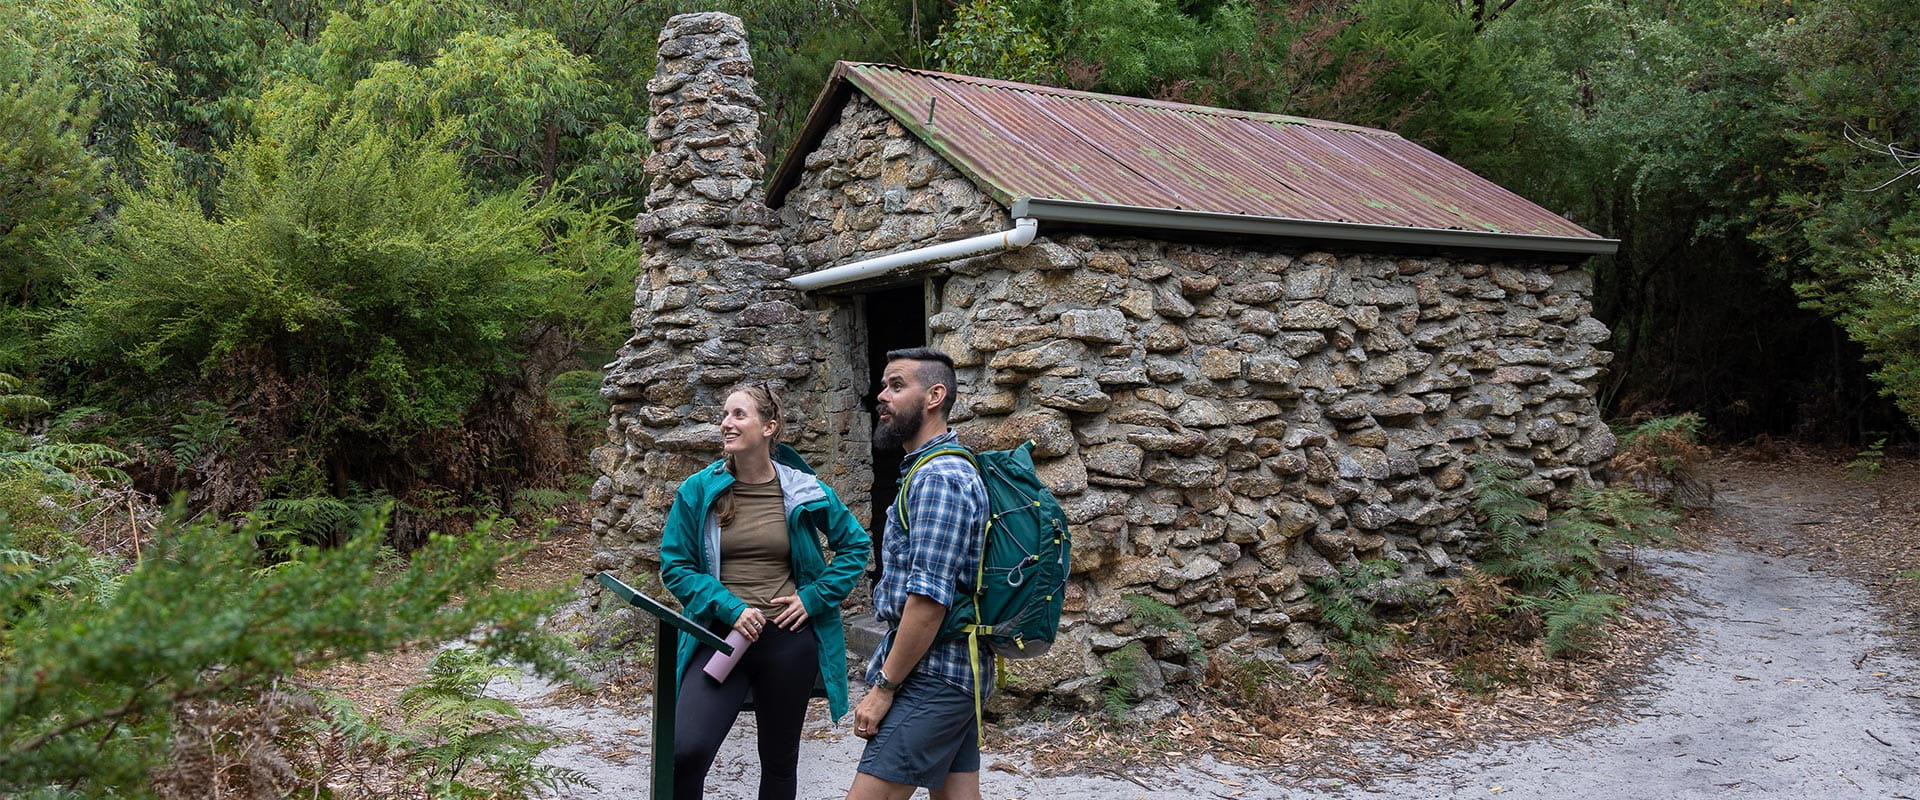 A woman and man wearing hiking gear looking at the view while standing in front of an information board with a hut in the background.